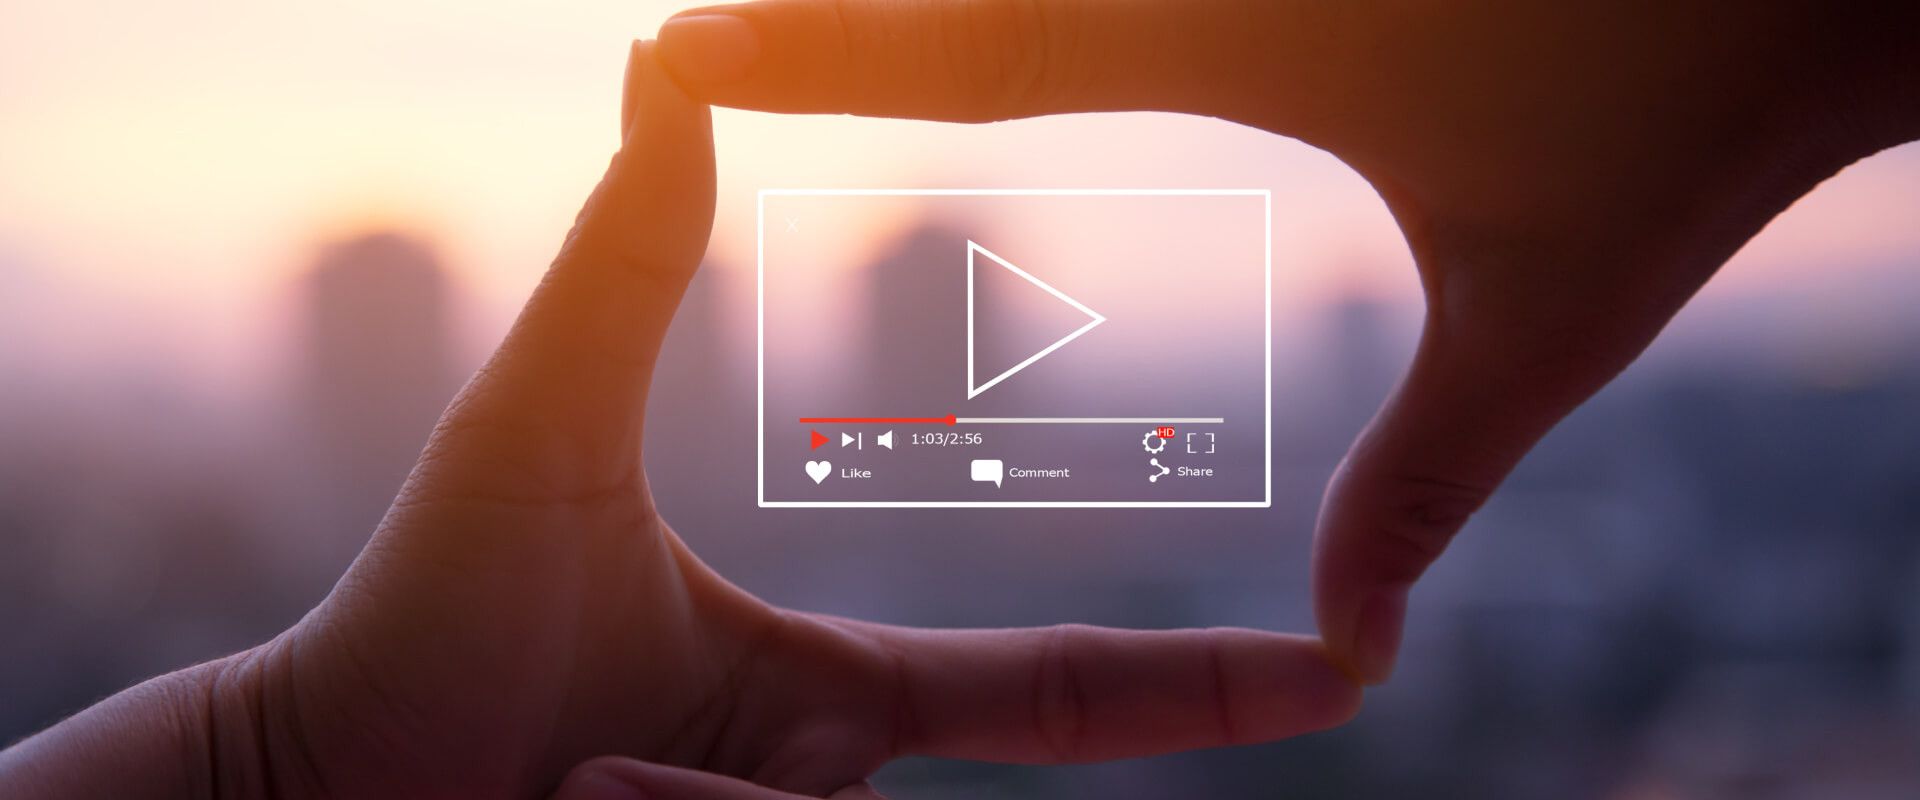 8 Tips for Video Marketing Success | WAM